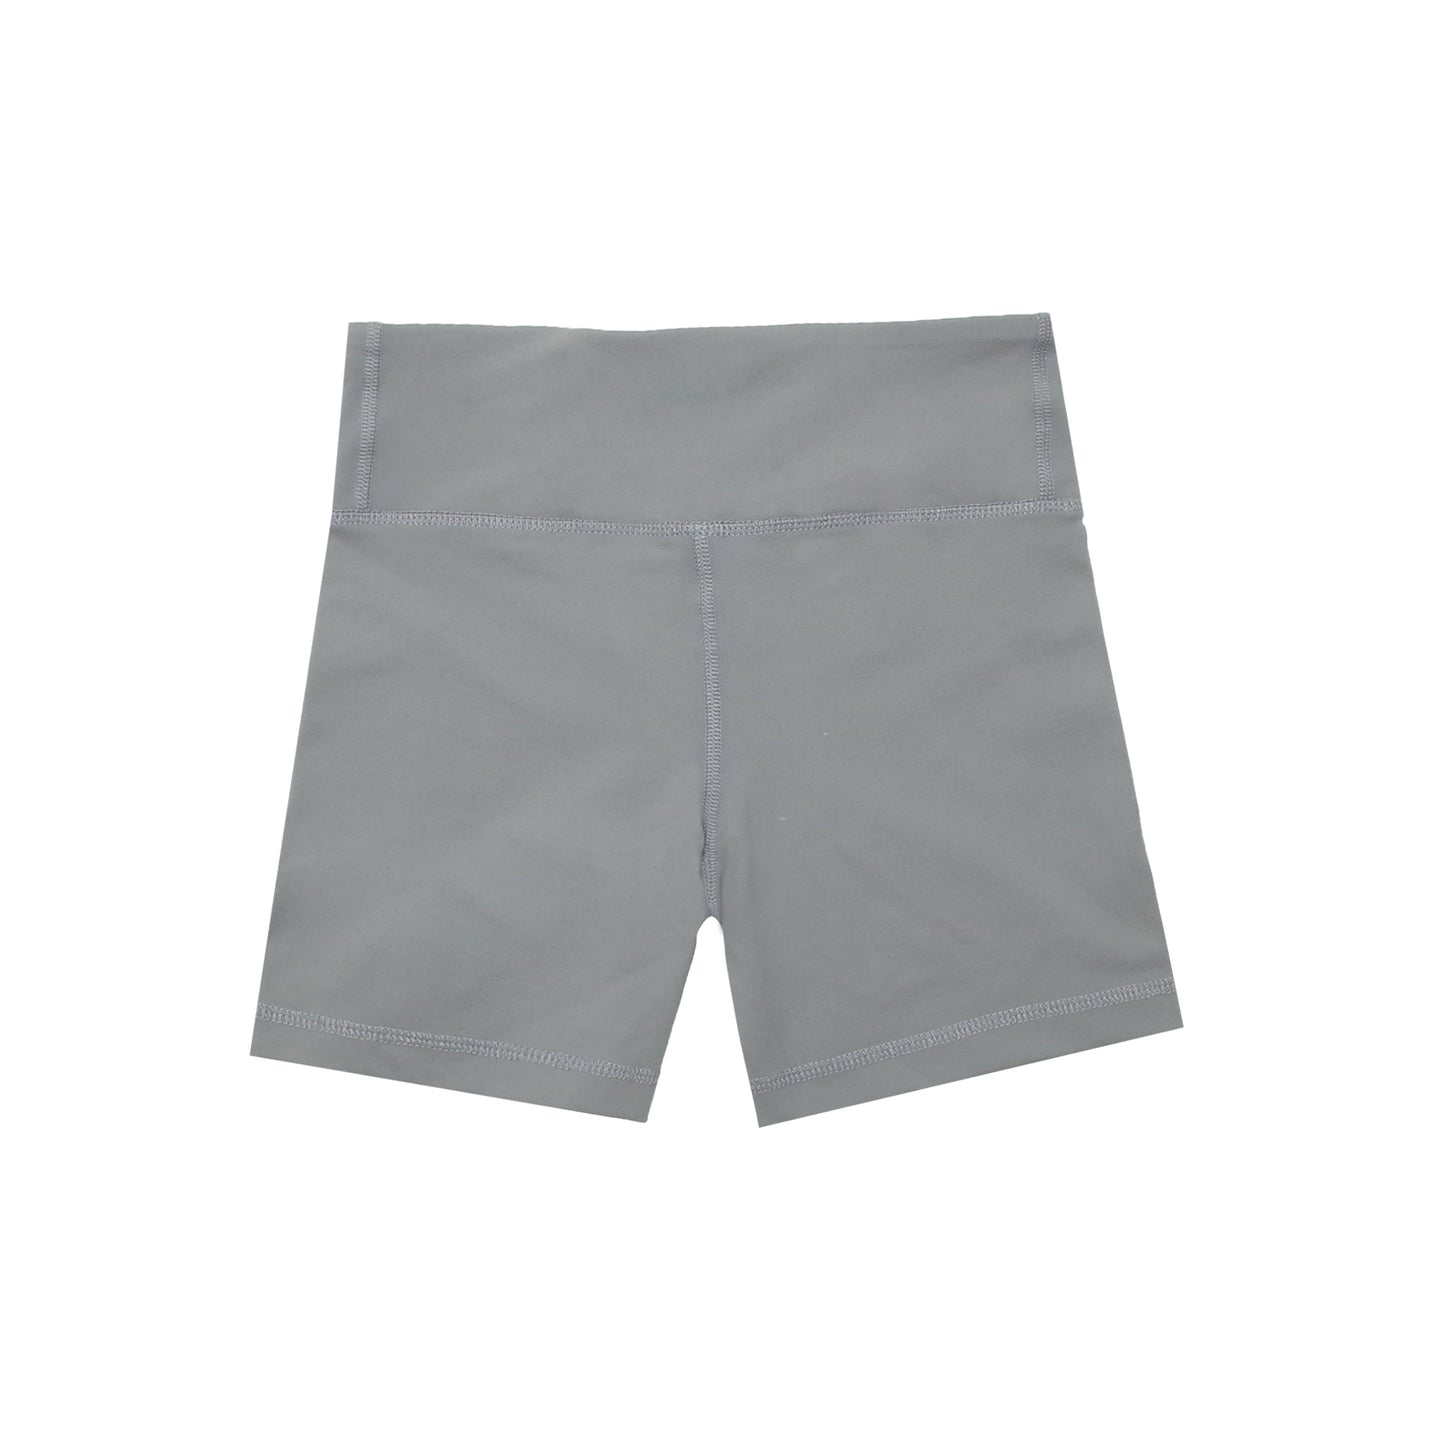 TDE New Classic Woman's Shorts (Gray) – Top Dawg Entertainment